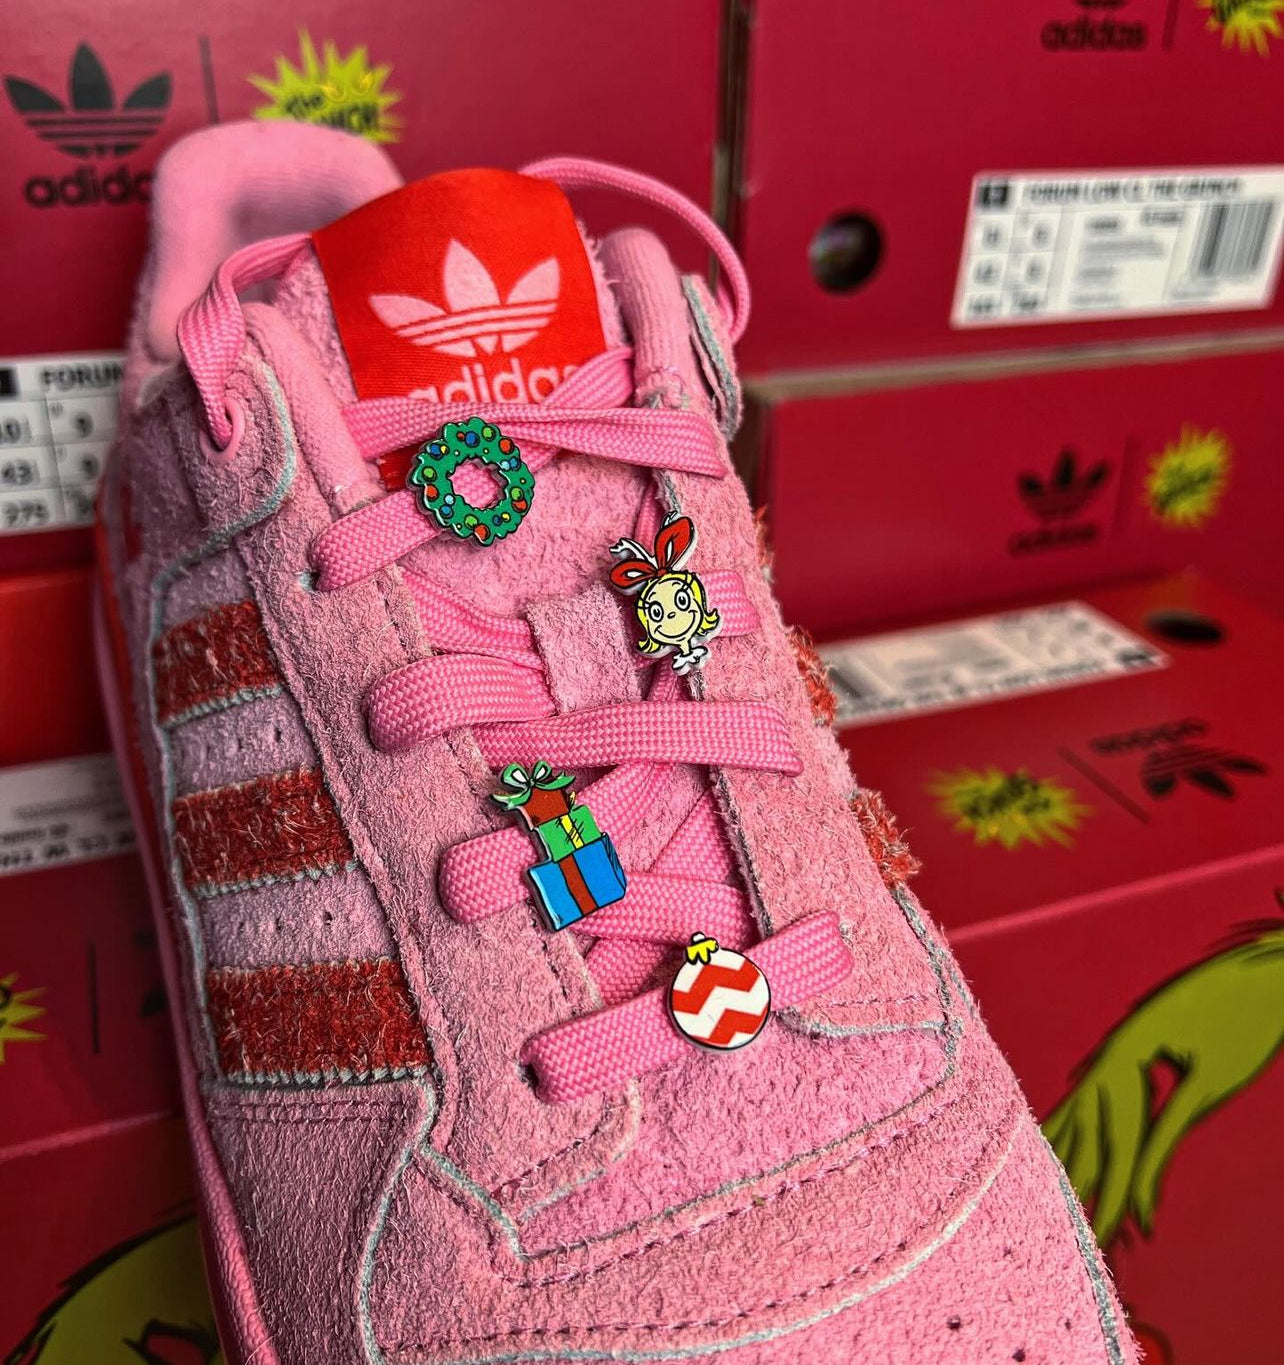 ADIDAS FORUM LOW THE GRINCH CINDY-LOU WHO PINK